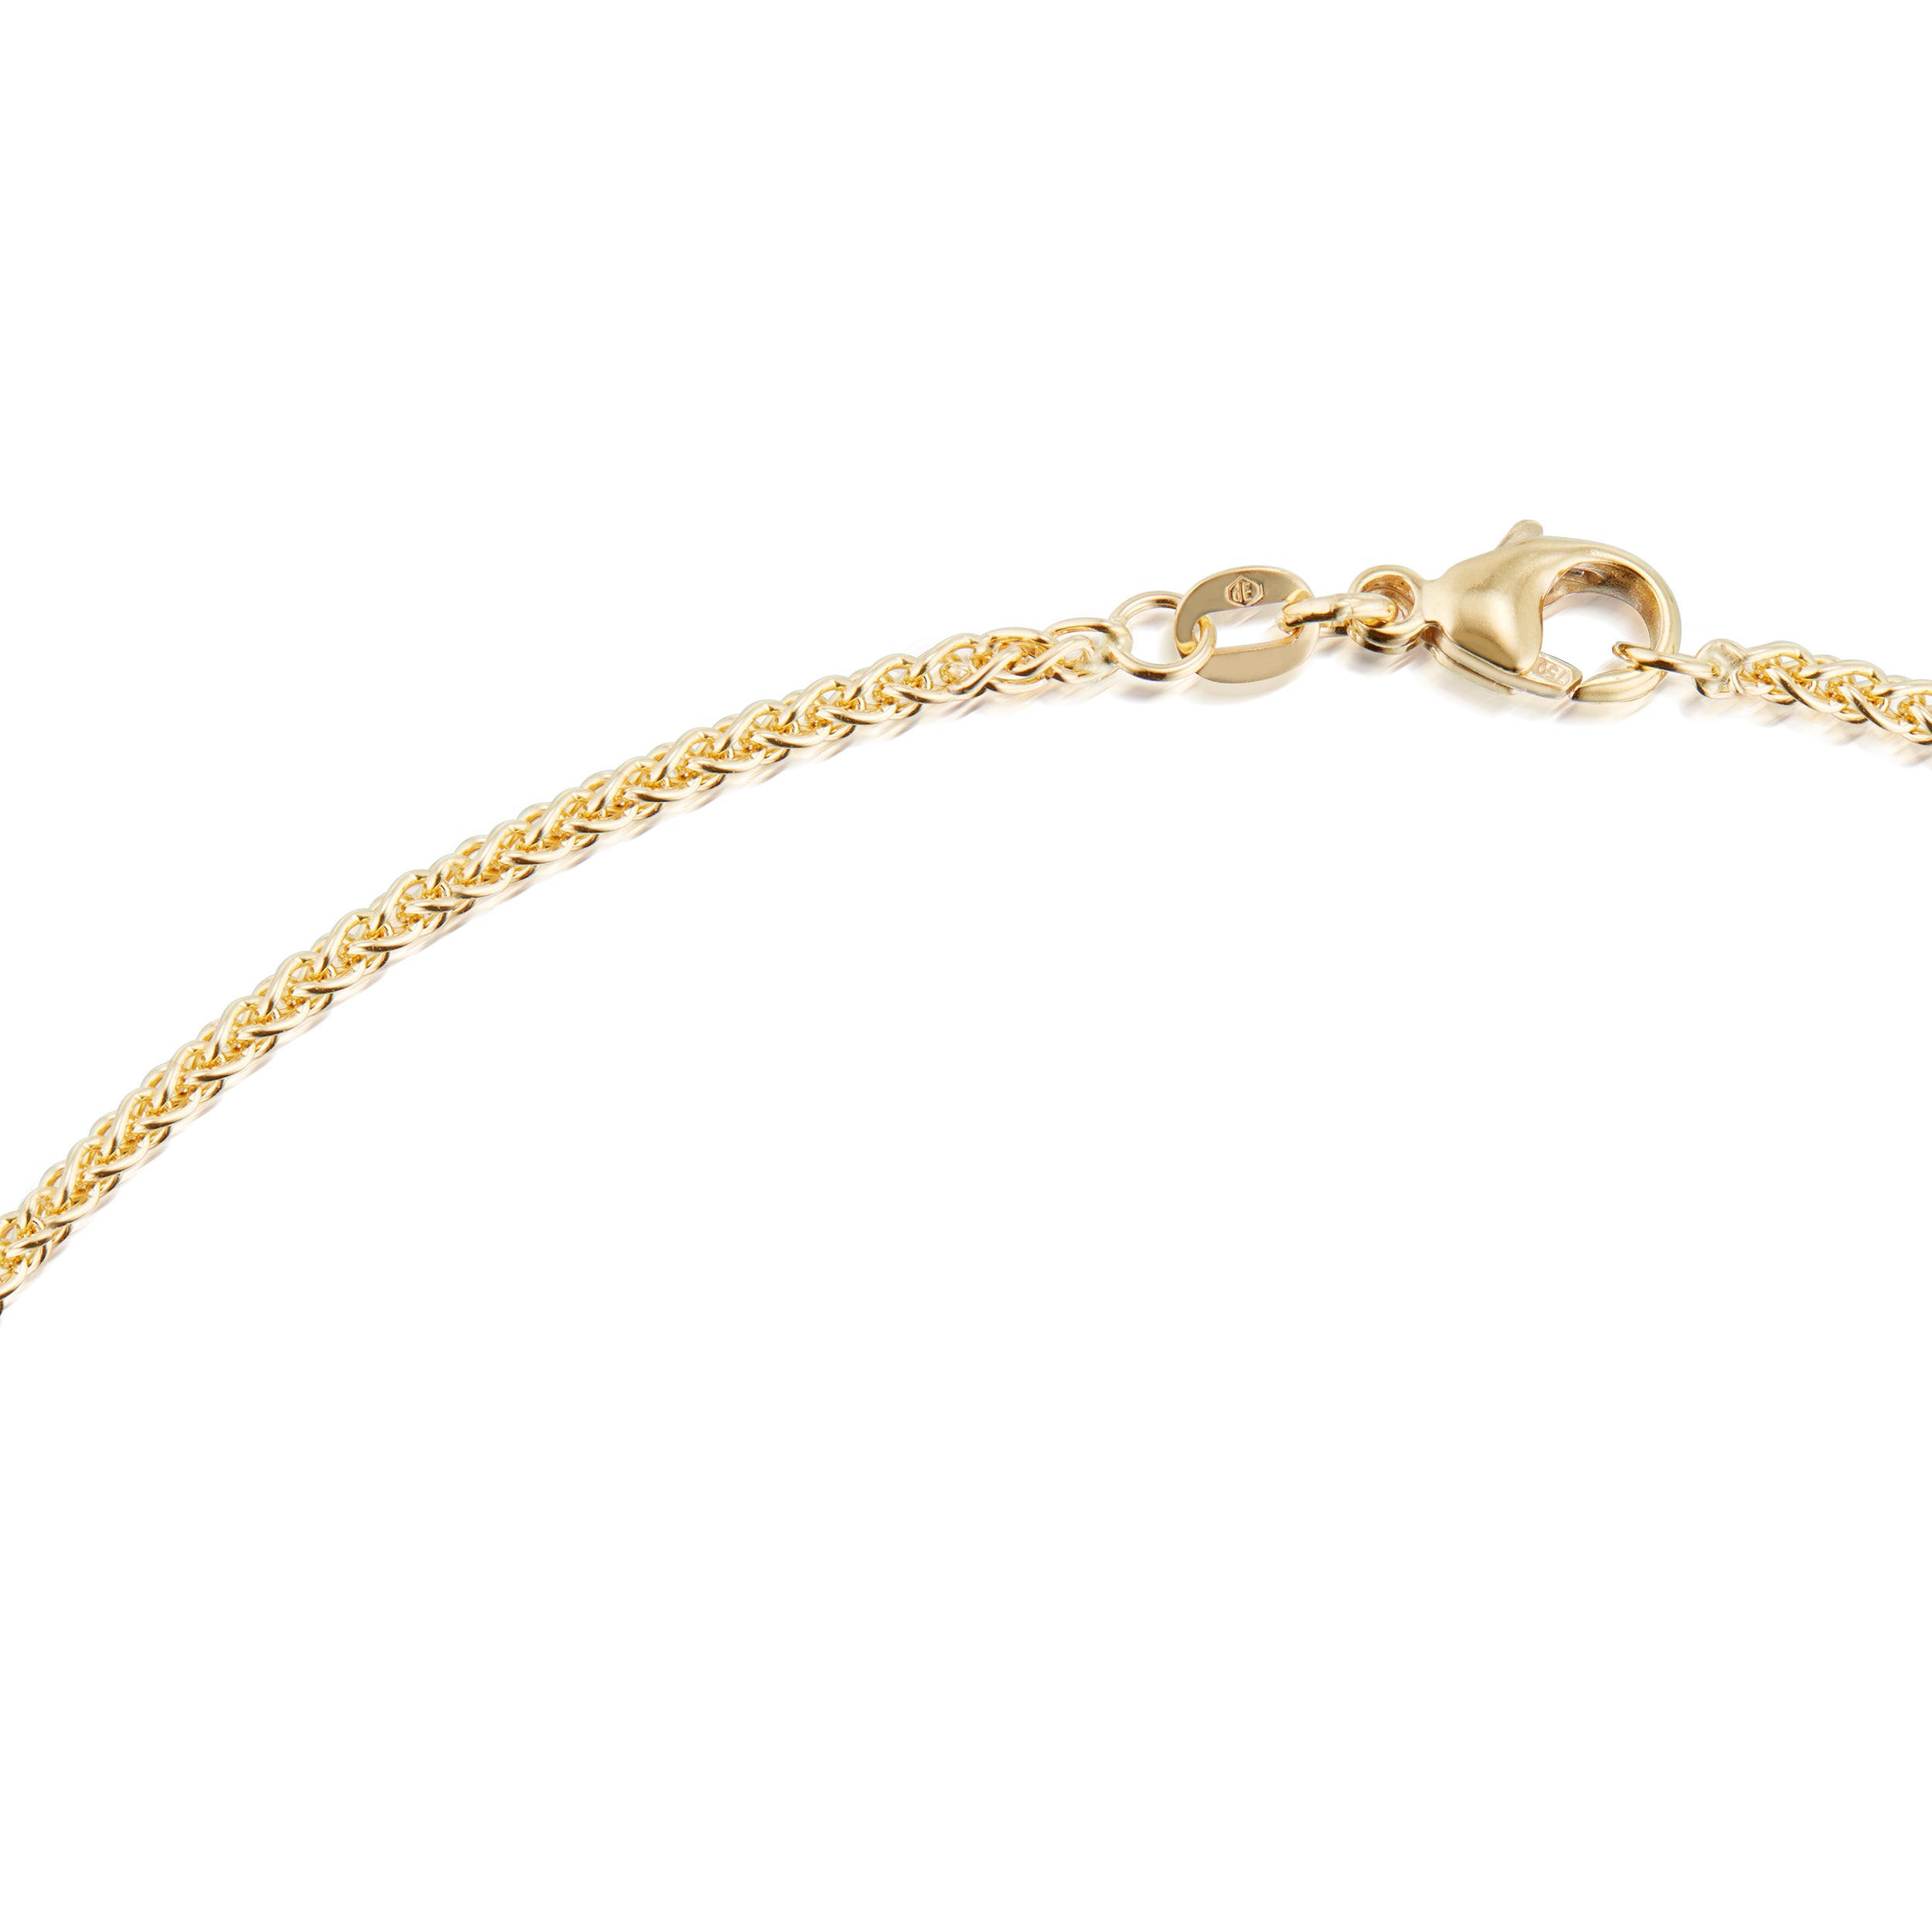 Round Wheat Chain Necklace, 2.4mm